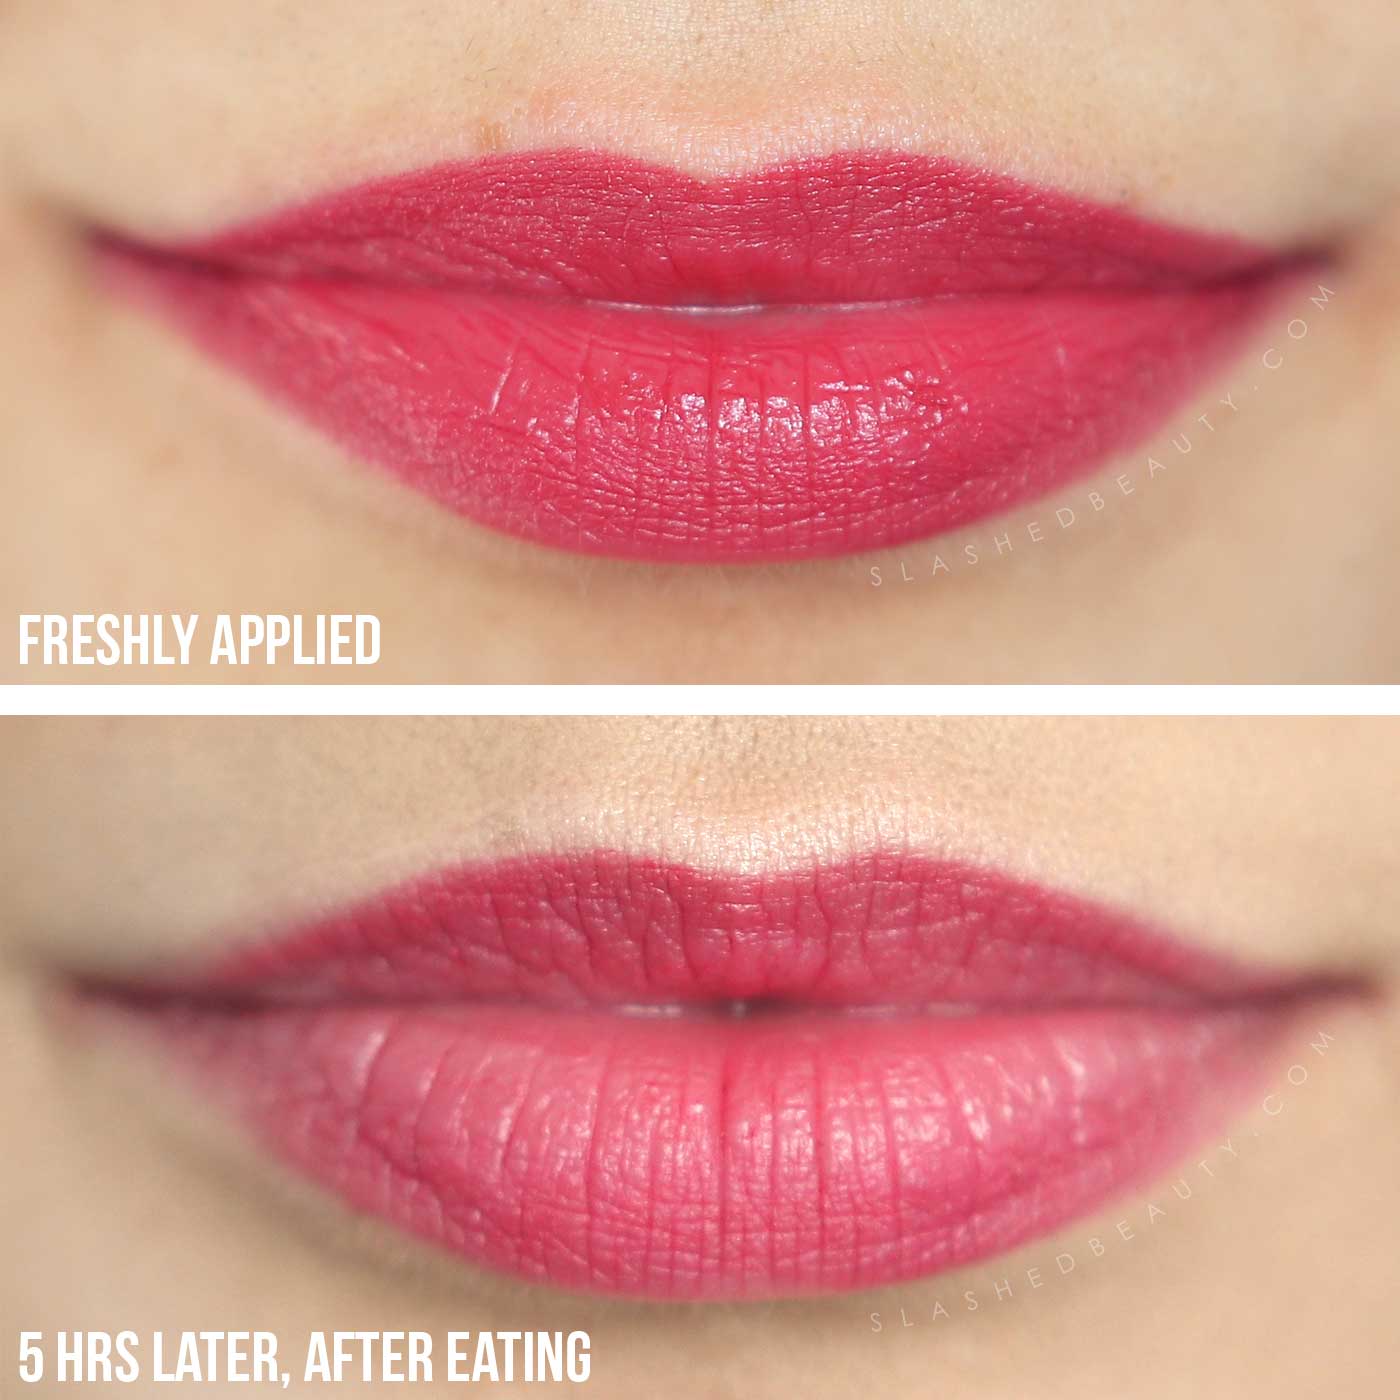 Pixi Naturellelips Before & After Photo, Review and Swatches | Slashed Beauty